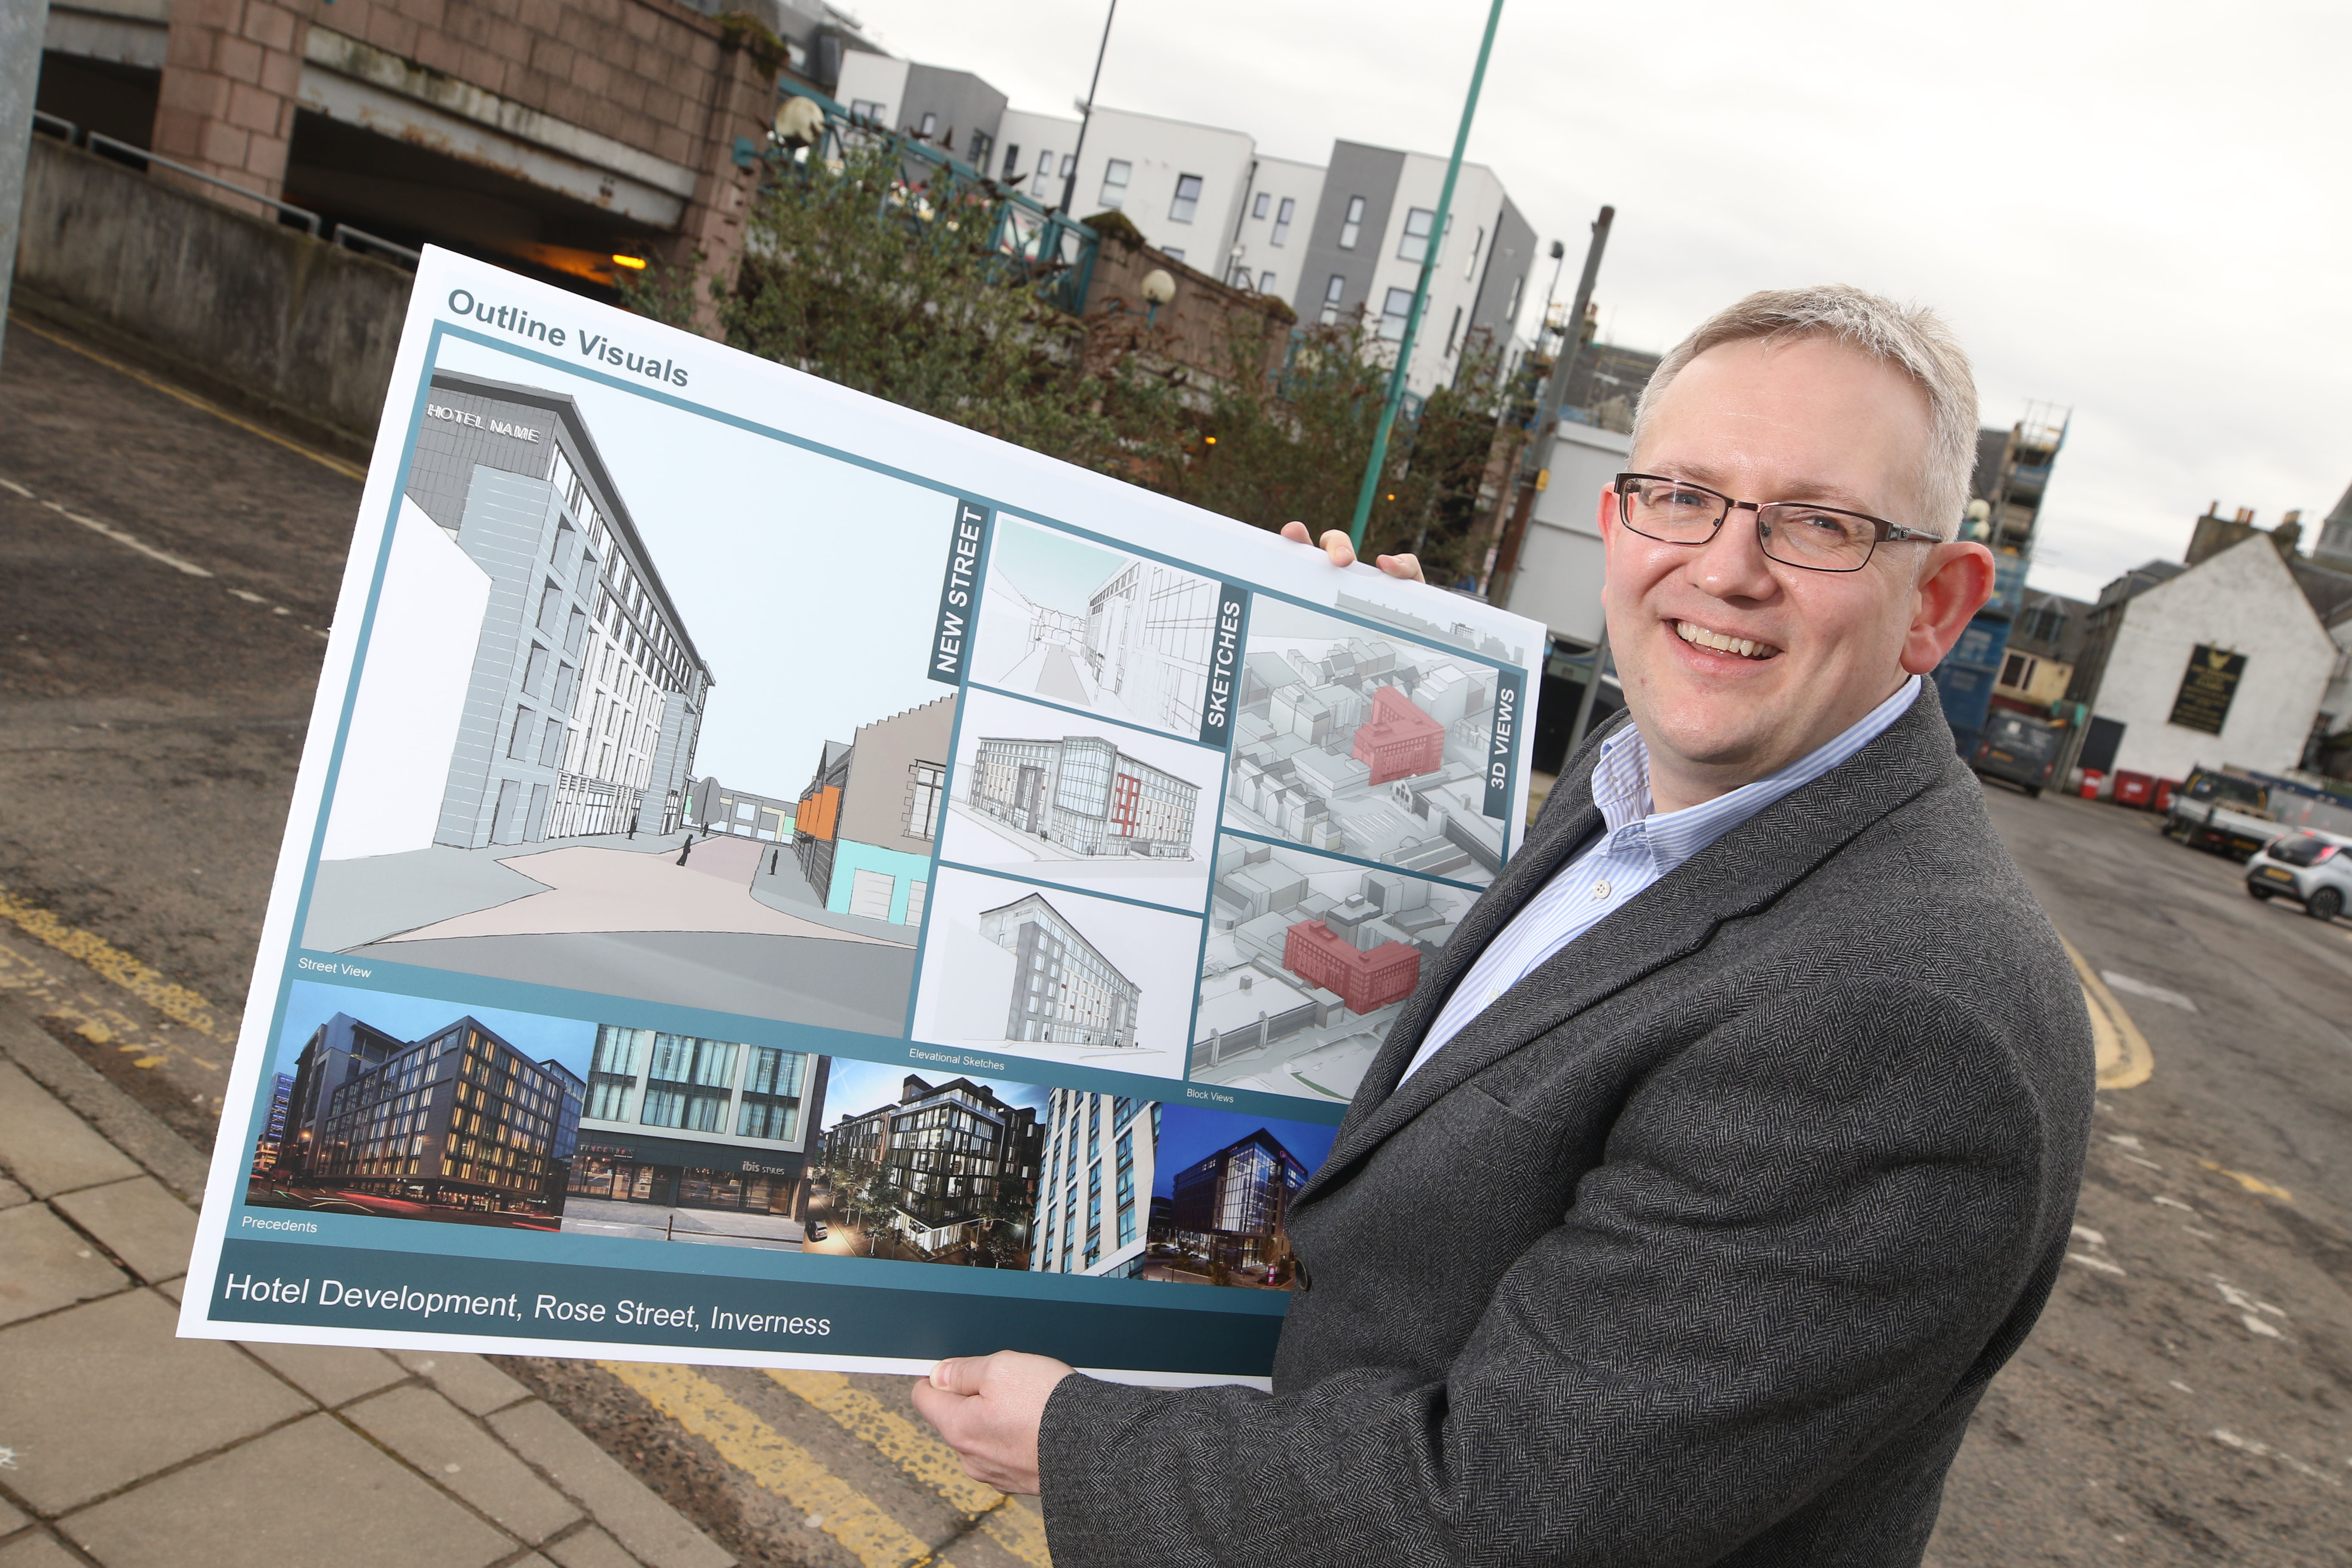 Stewart Campbell, co-owner of the land where the two-storey Rose Street car park is located, with plans for a hotel to be built on the site.